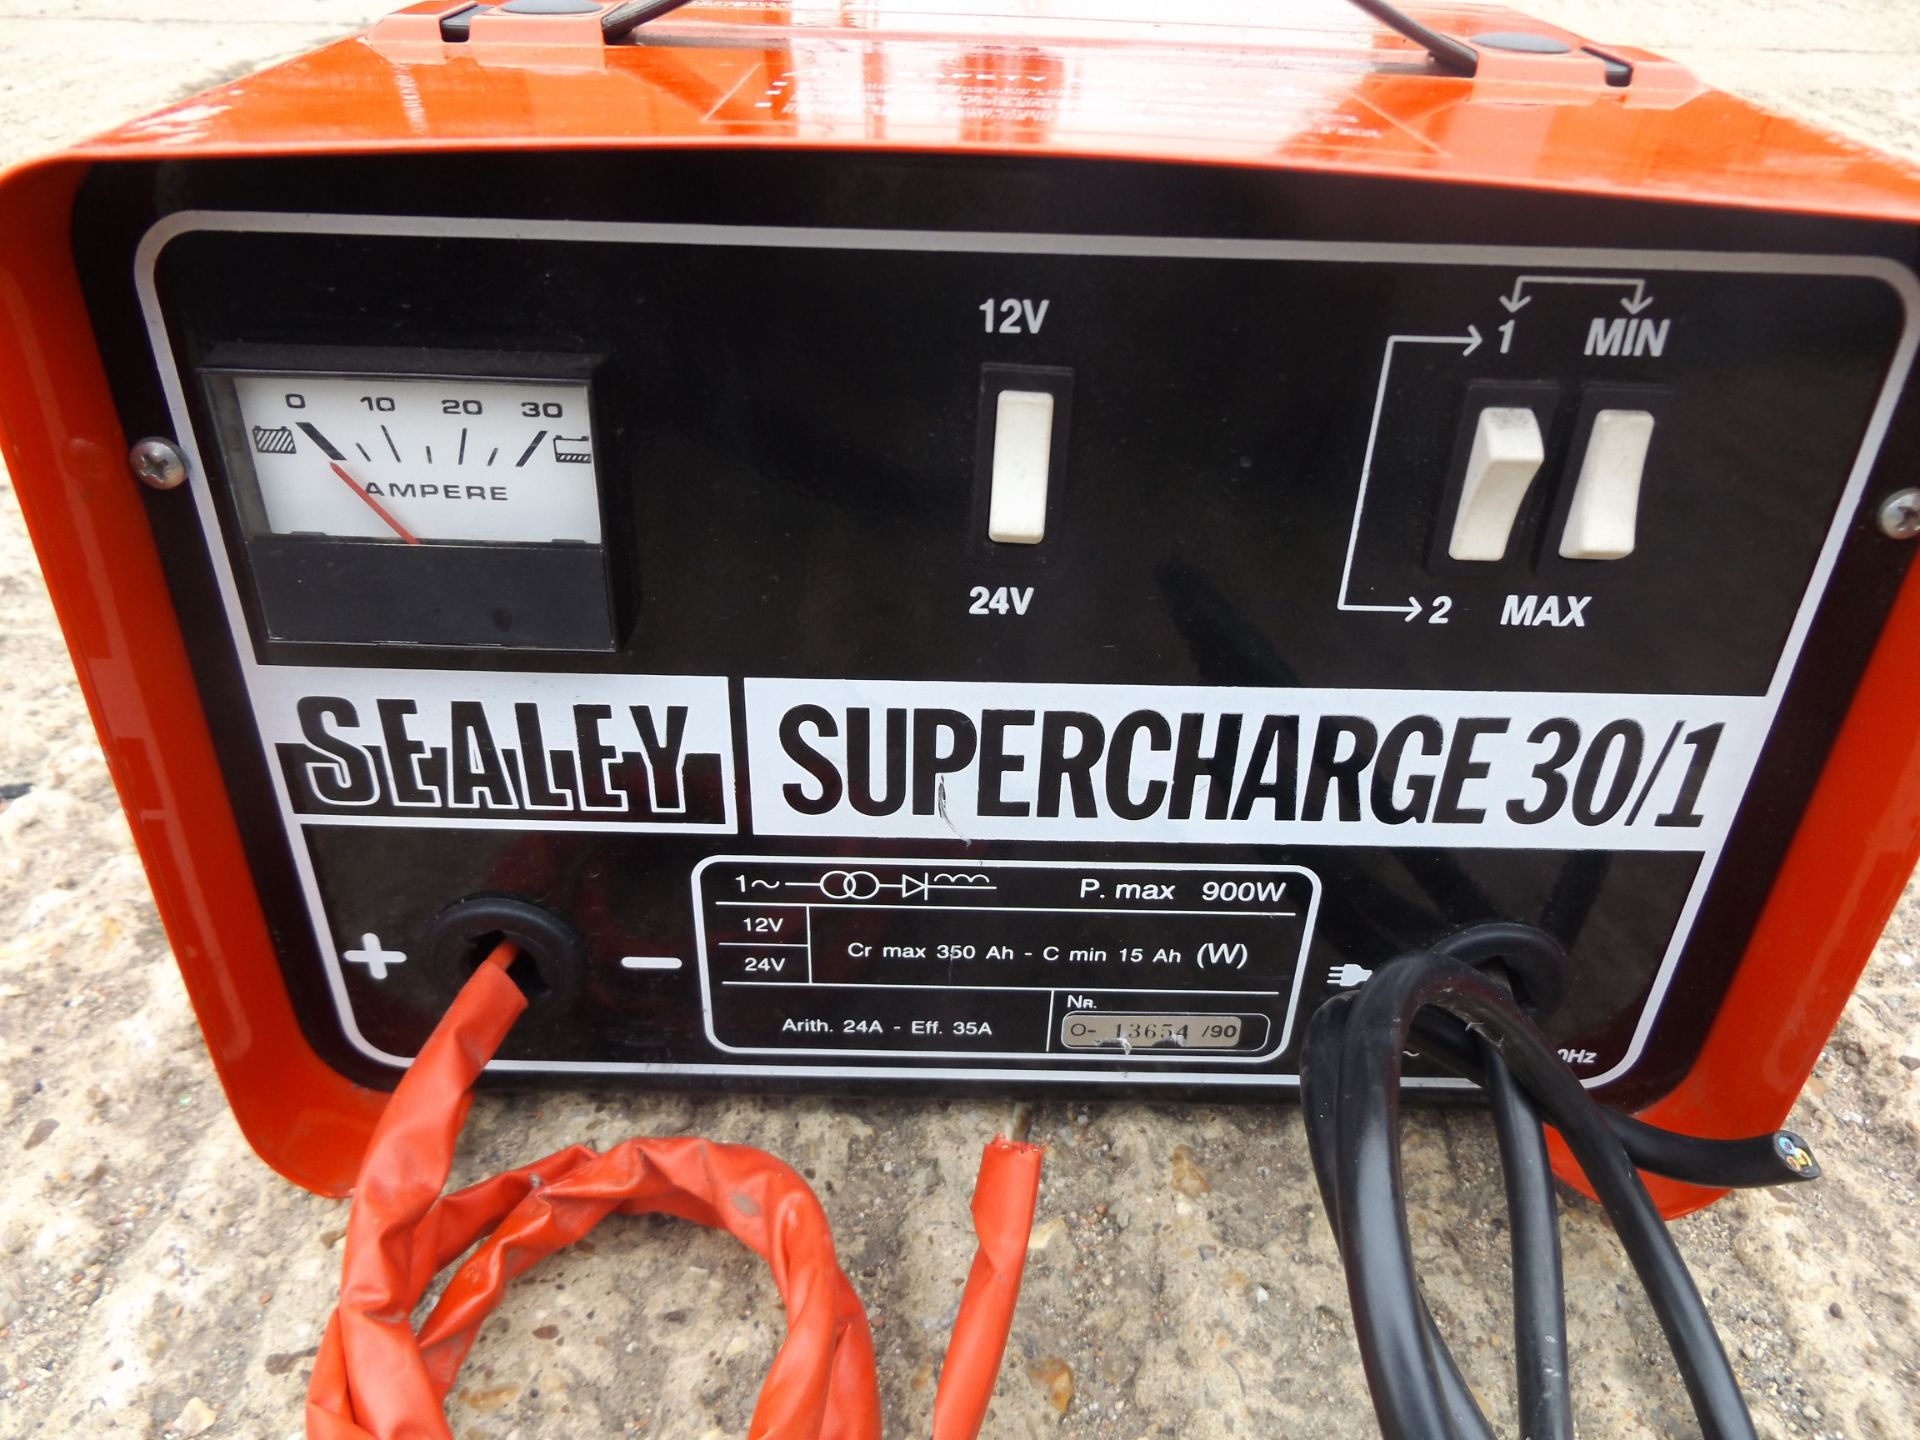 Sealey Supercharge 30/1 Battery Charger - Image 2 of 5